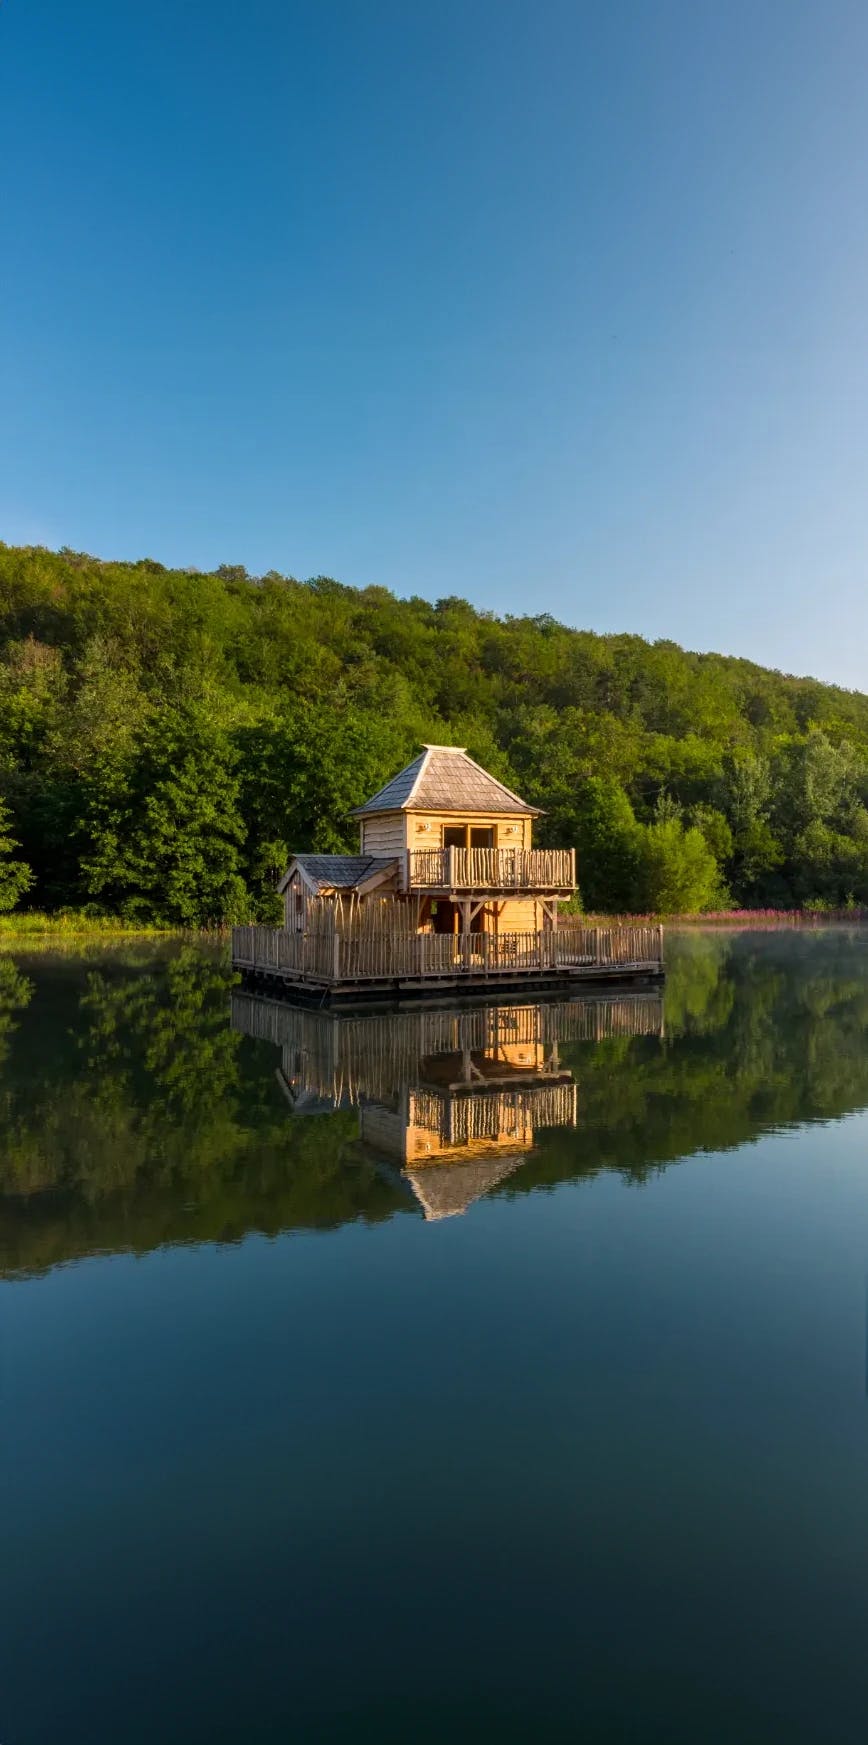 Greengo, booking eco-friendly accommodations, a French alternative to Airbnb